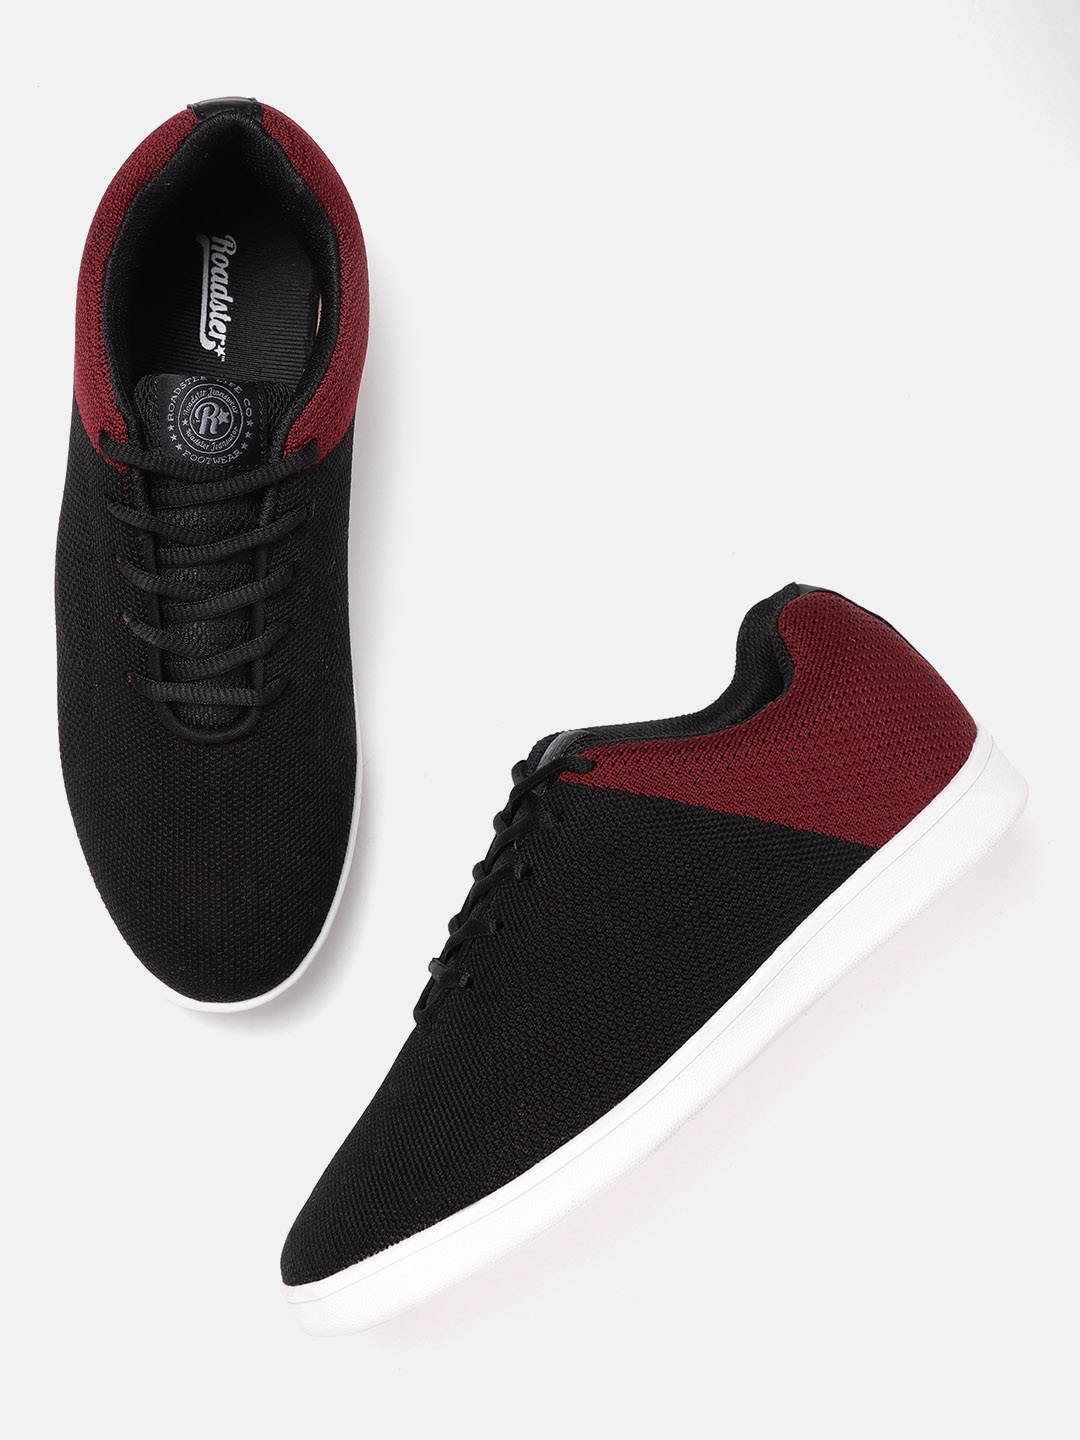 Buy Roadster Men Black And Maroon Colourblocked Sneakers Casual Shoes